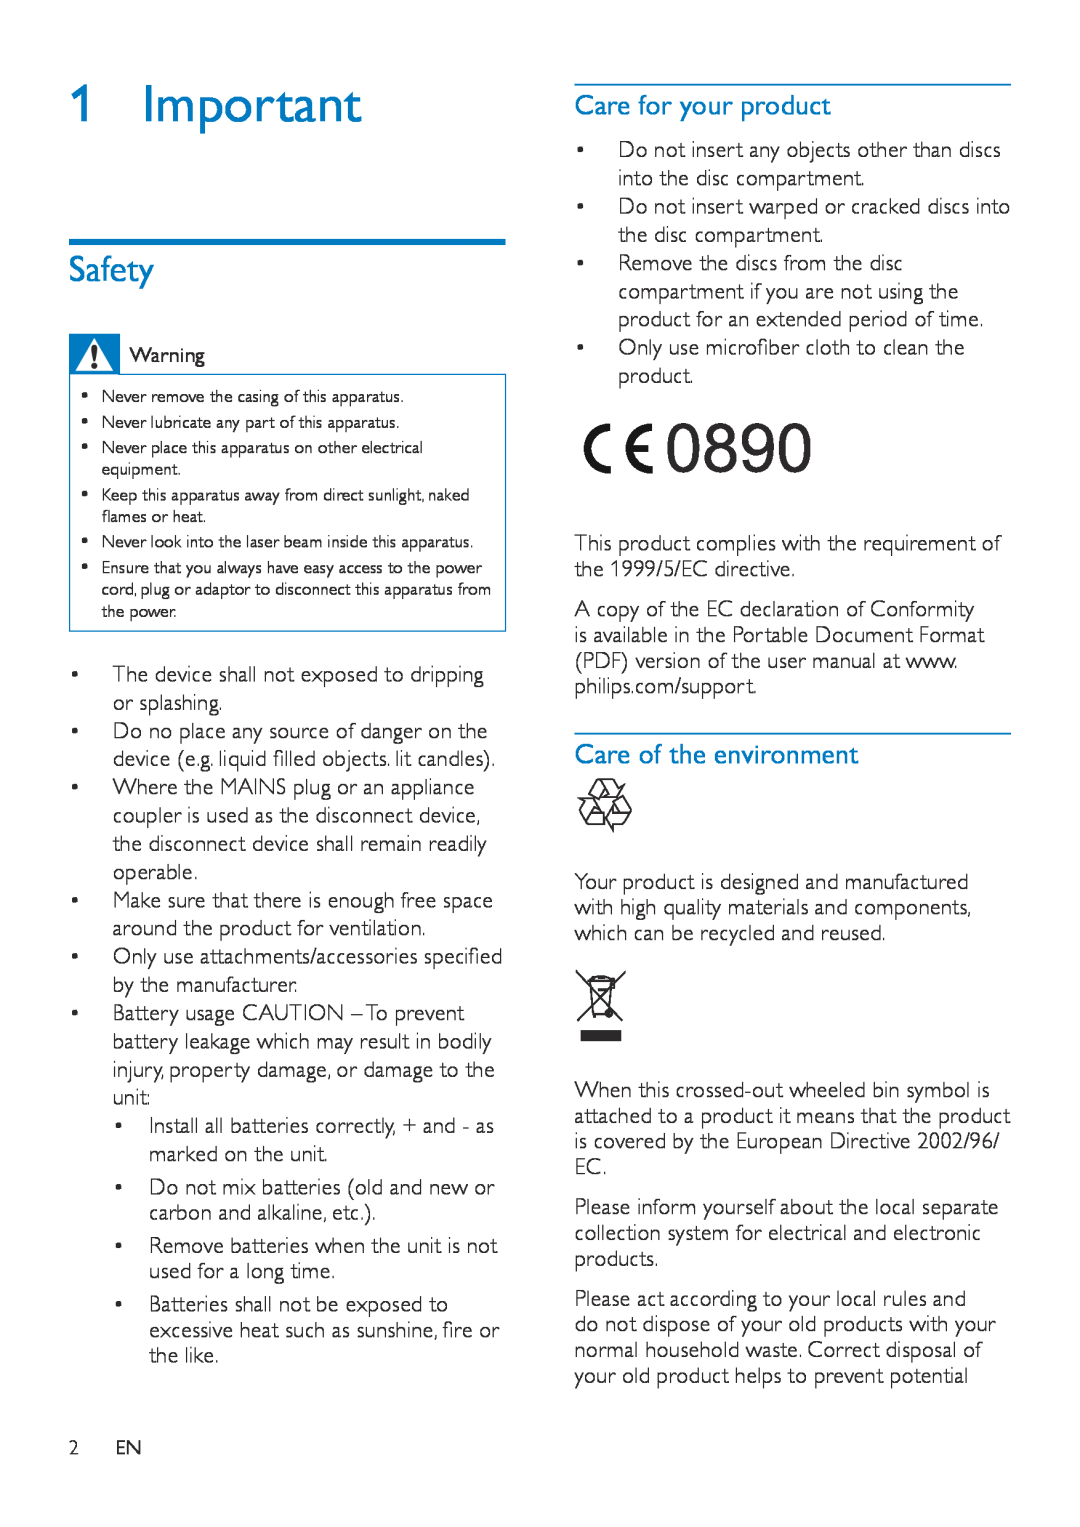 Philips DTB855 user manual Safety, Care for your product, Care of the environment 